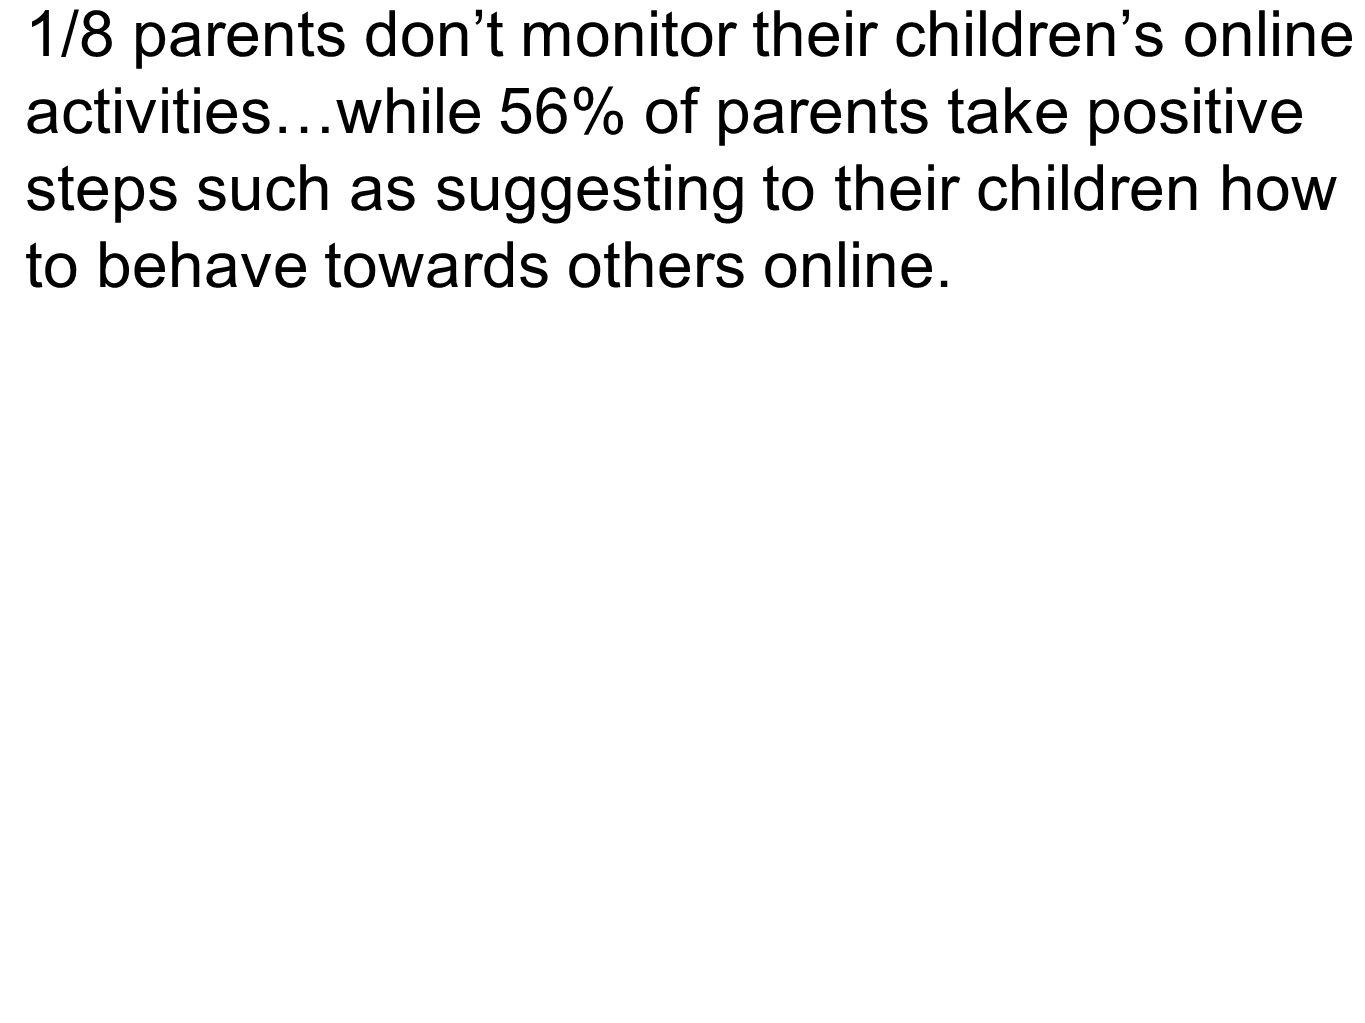 1/8 parents dont monitor their childrens online activities…while 56% of parents take positive steps such as suggesting to their children how to behave towards others online.